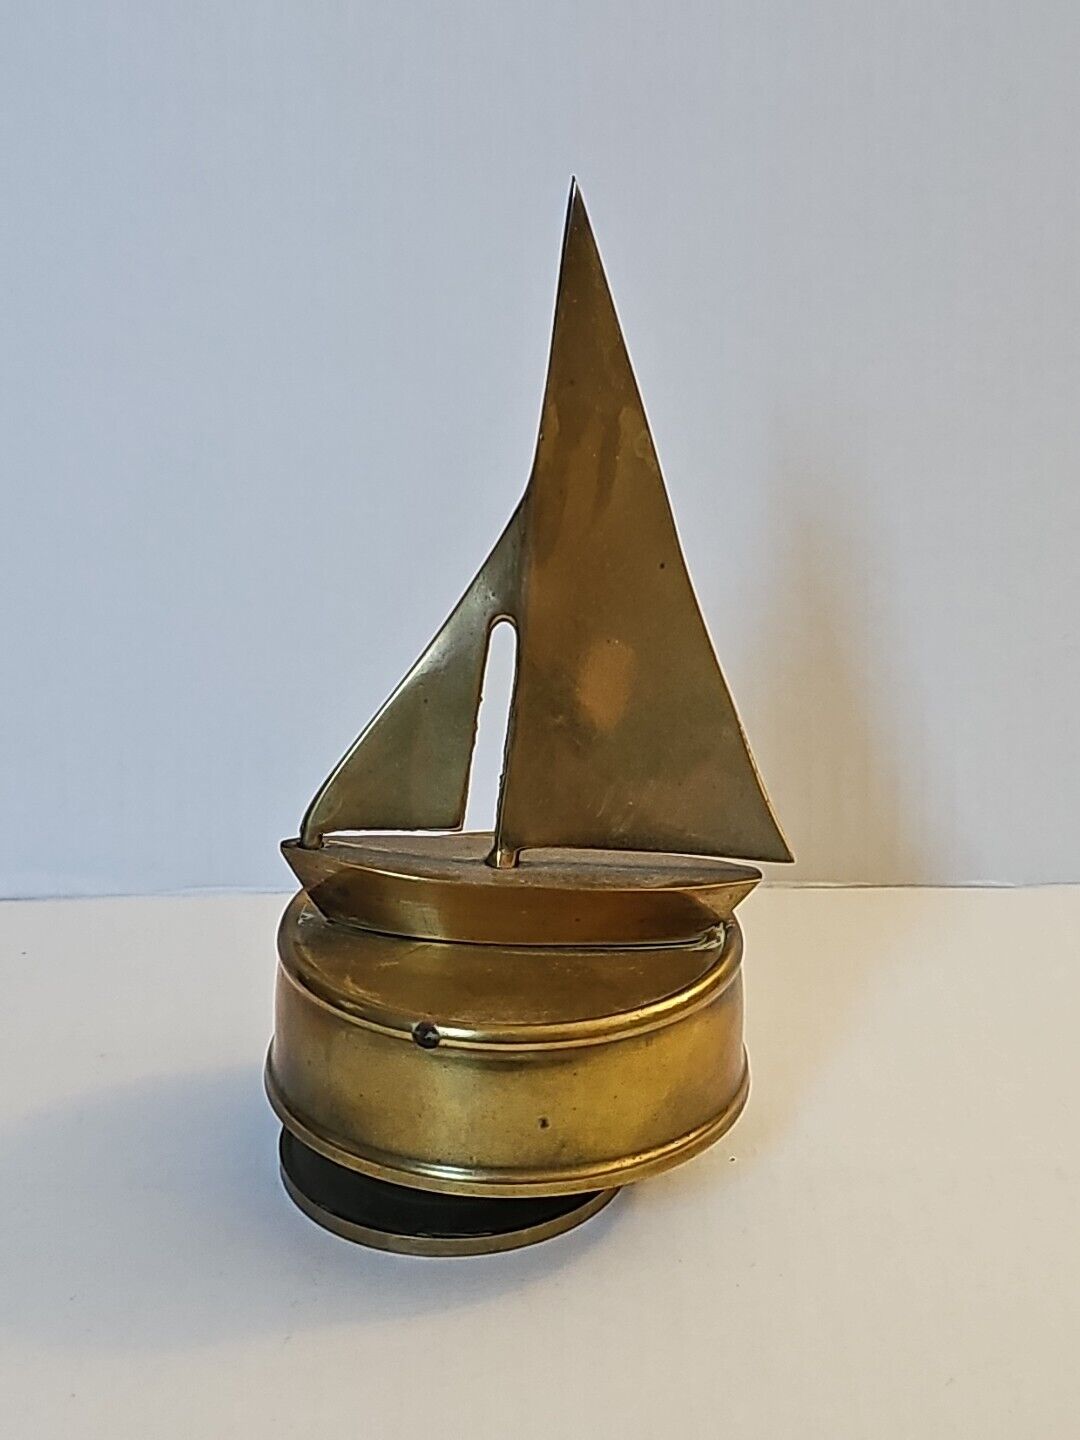 Vintage Brass Sailboat Rotating Music Box Toy Pan-Asia Made In Taiwan 